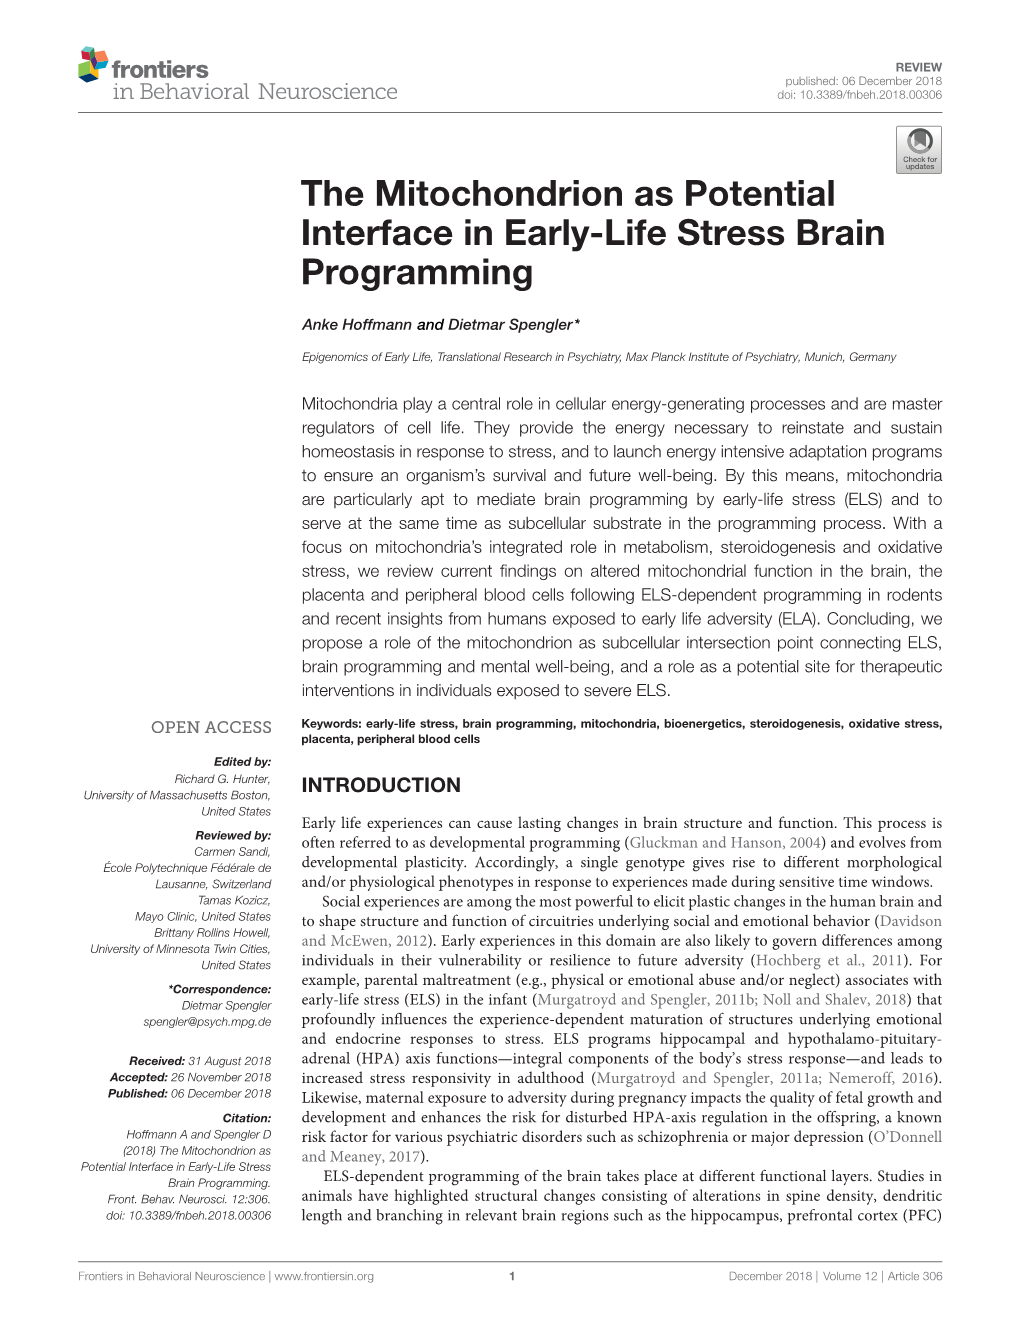 The Mitochondrion As Potential Interface in Early-Life Stress Brain Programming